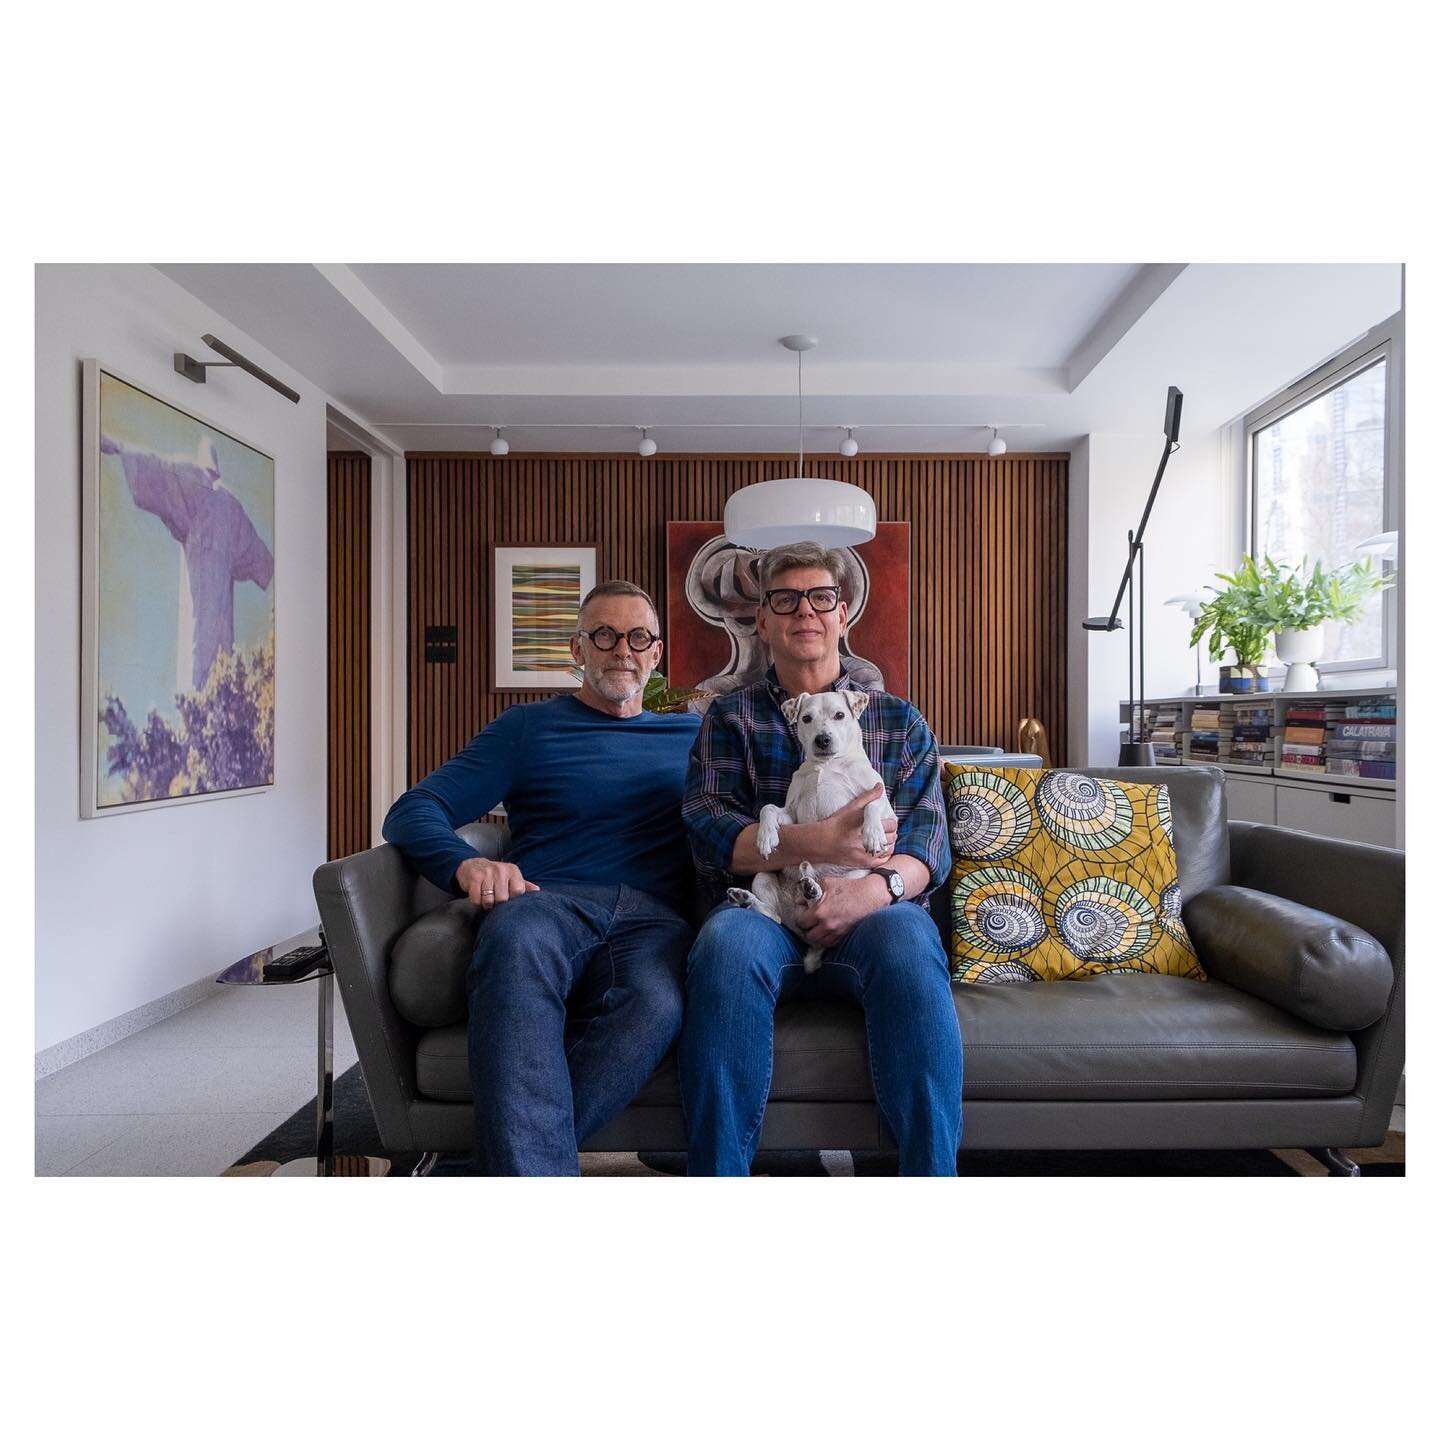 Fifteen Minute Series
-
As part of my residency here at @banksidehotel I have been working on my 'Fifteen Minute Series' to document the area. 
-
As an extension to that I wanted to capture some of the local residents in their apartments to put faces